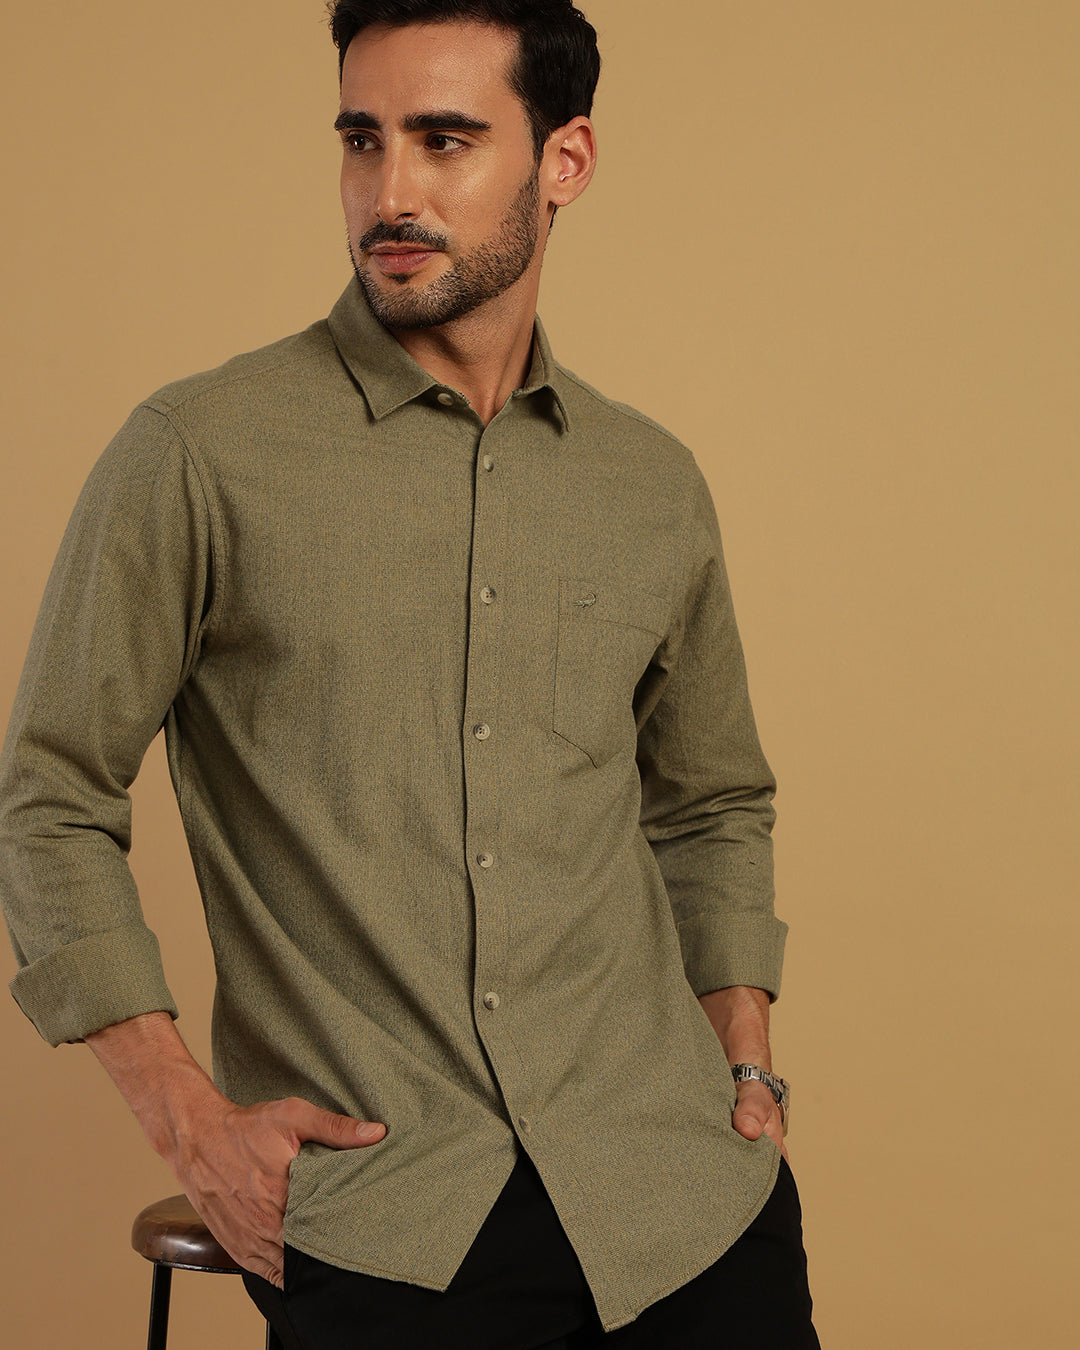 Discover Crocodile Grindle Textured Green Shirt Online